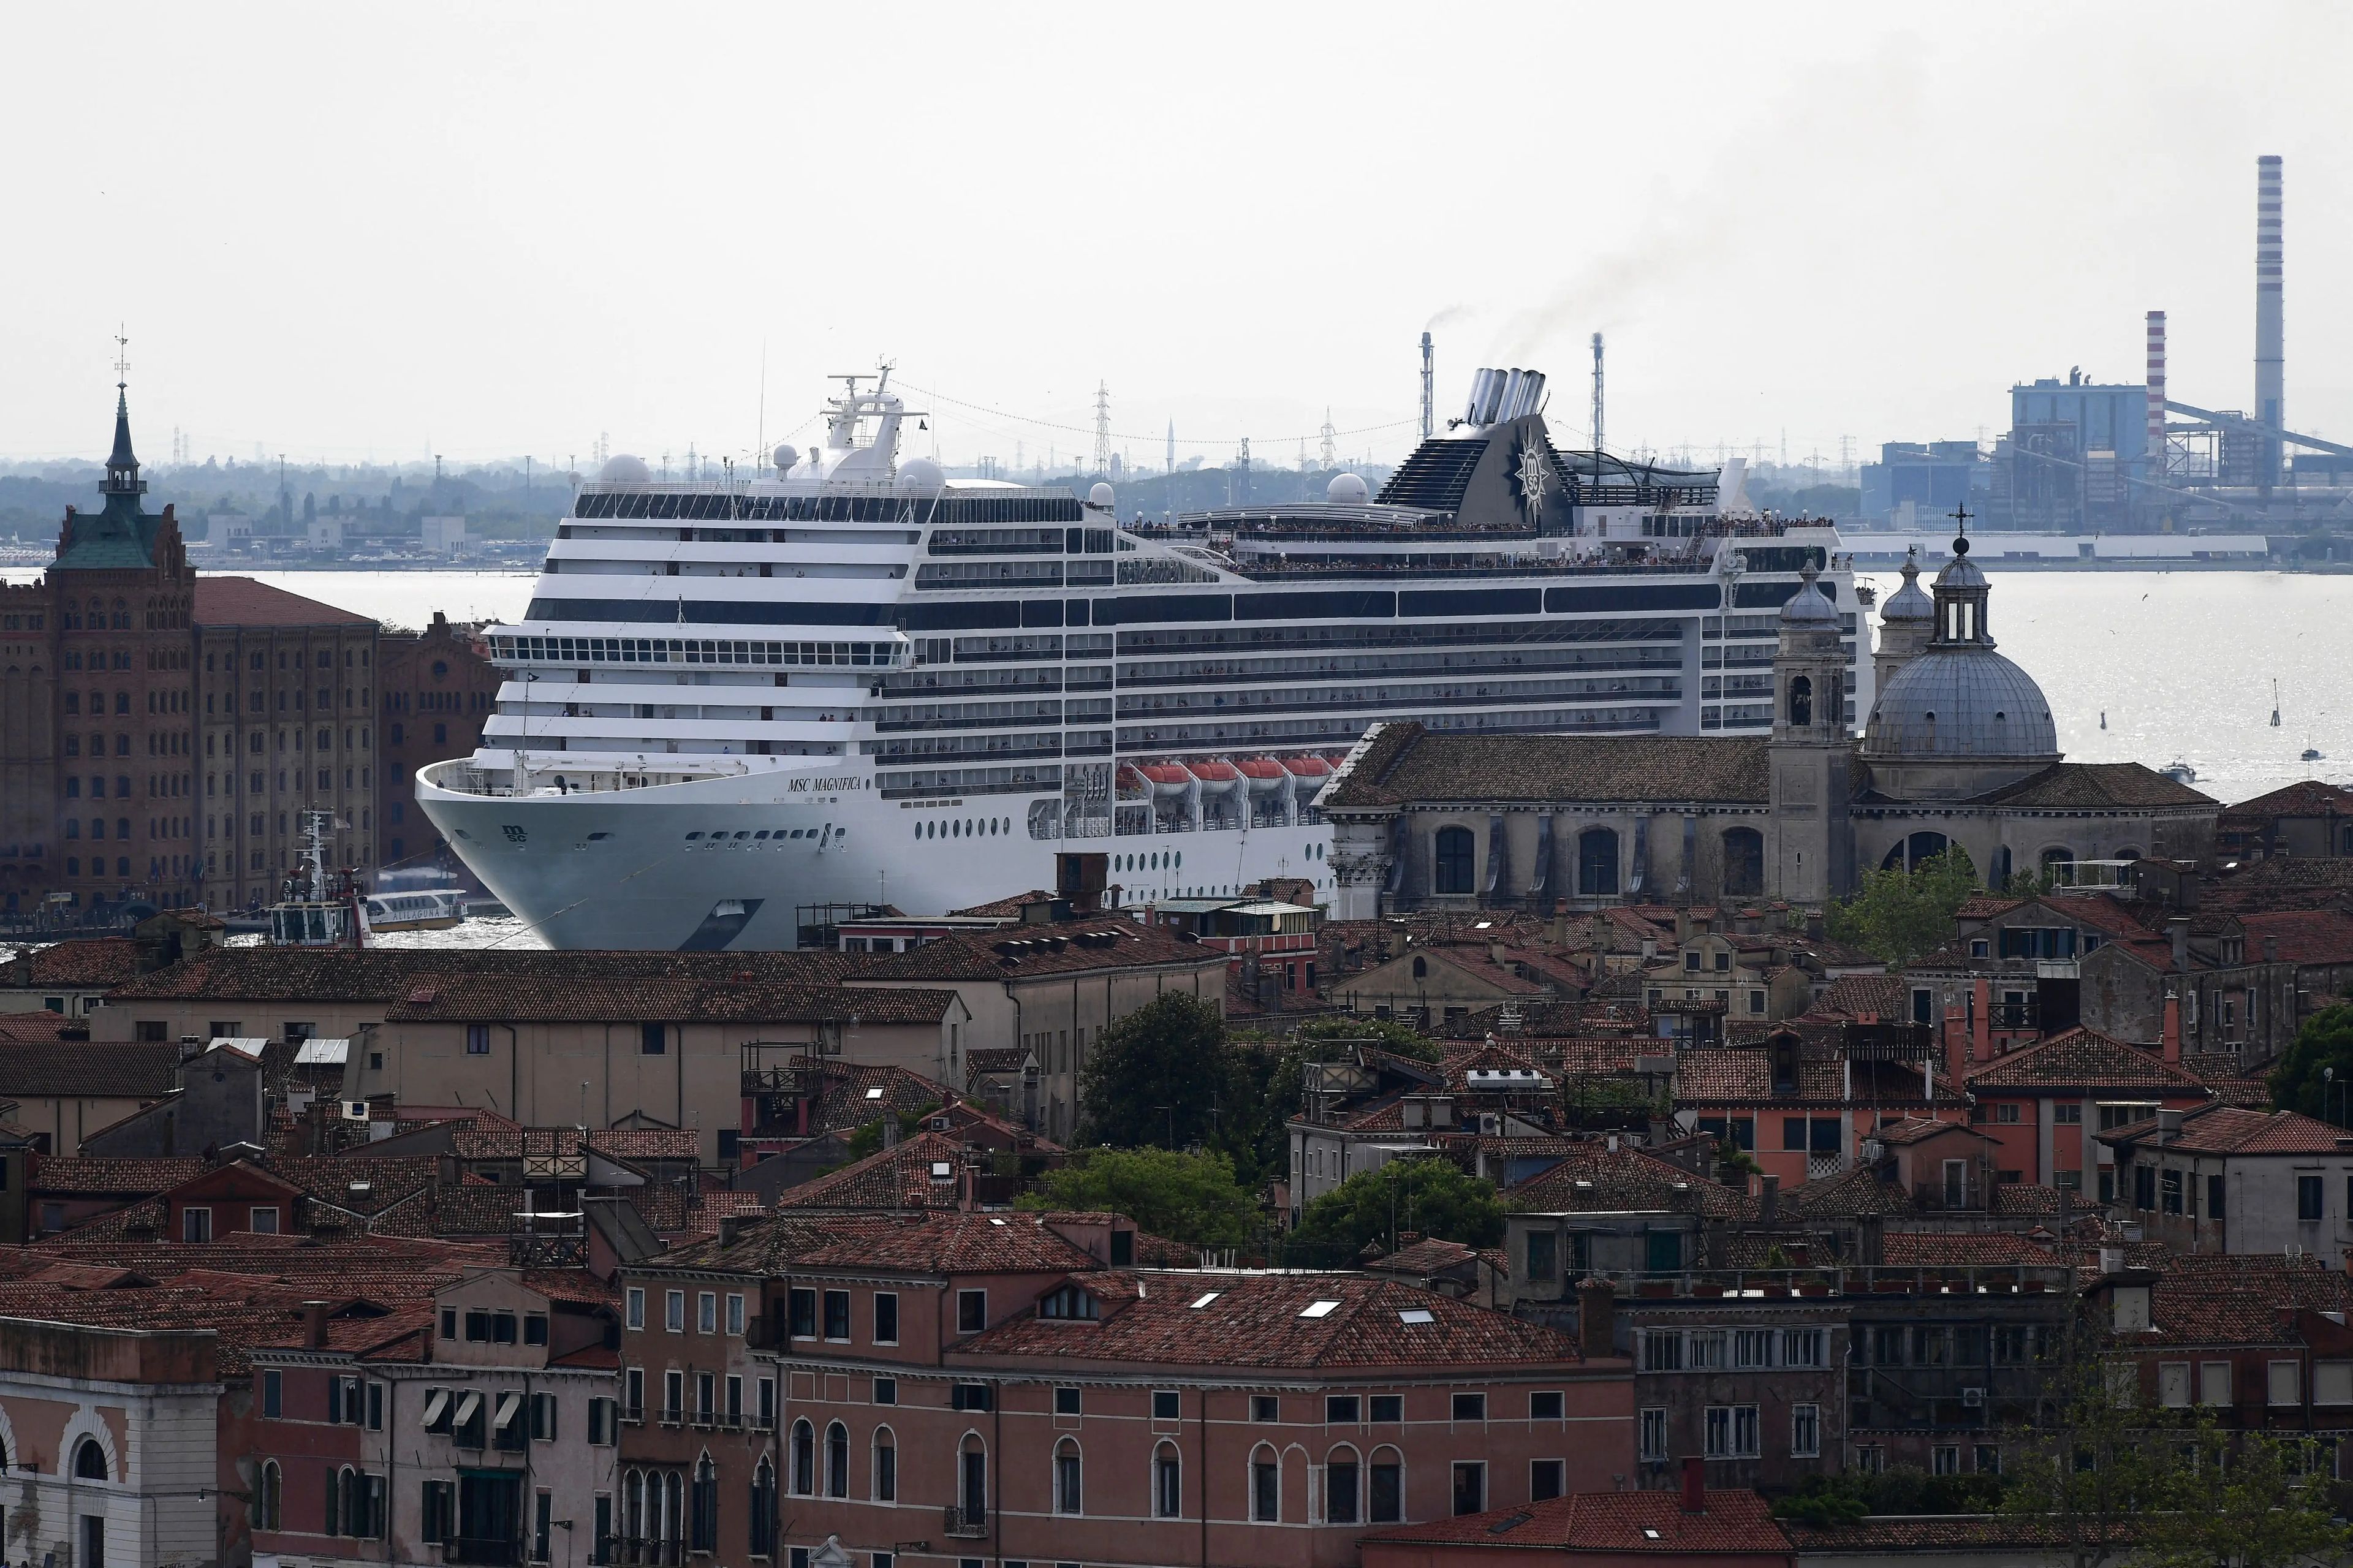 The MSC Magnifica cruise ship docked in Venice.